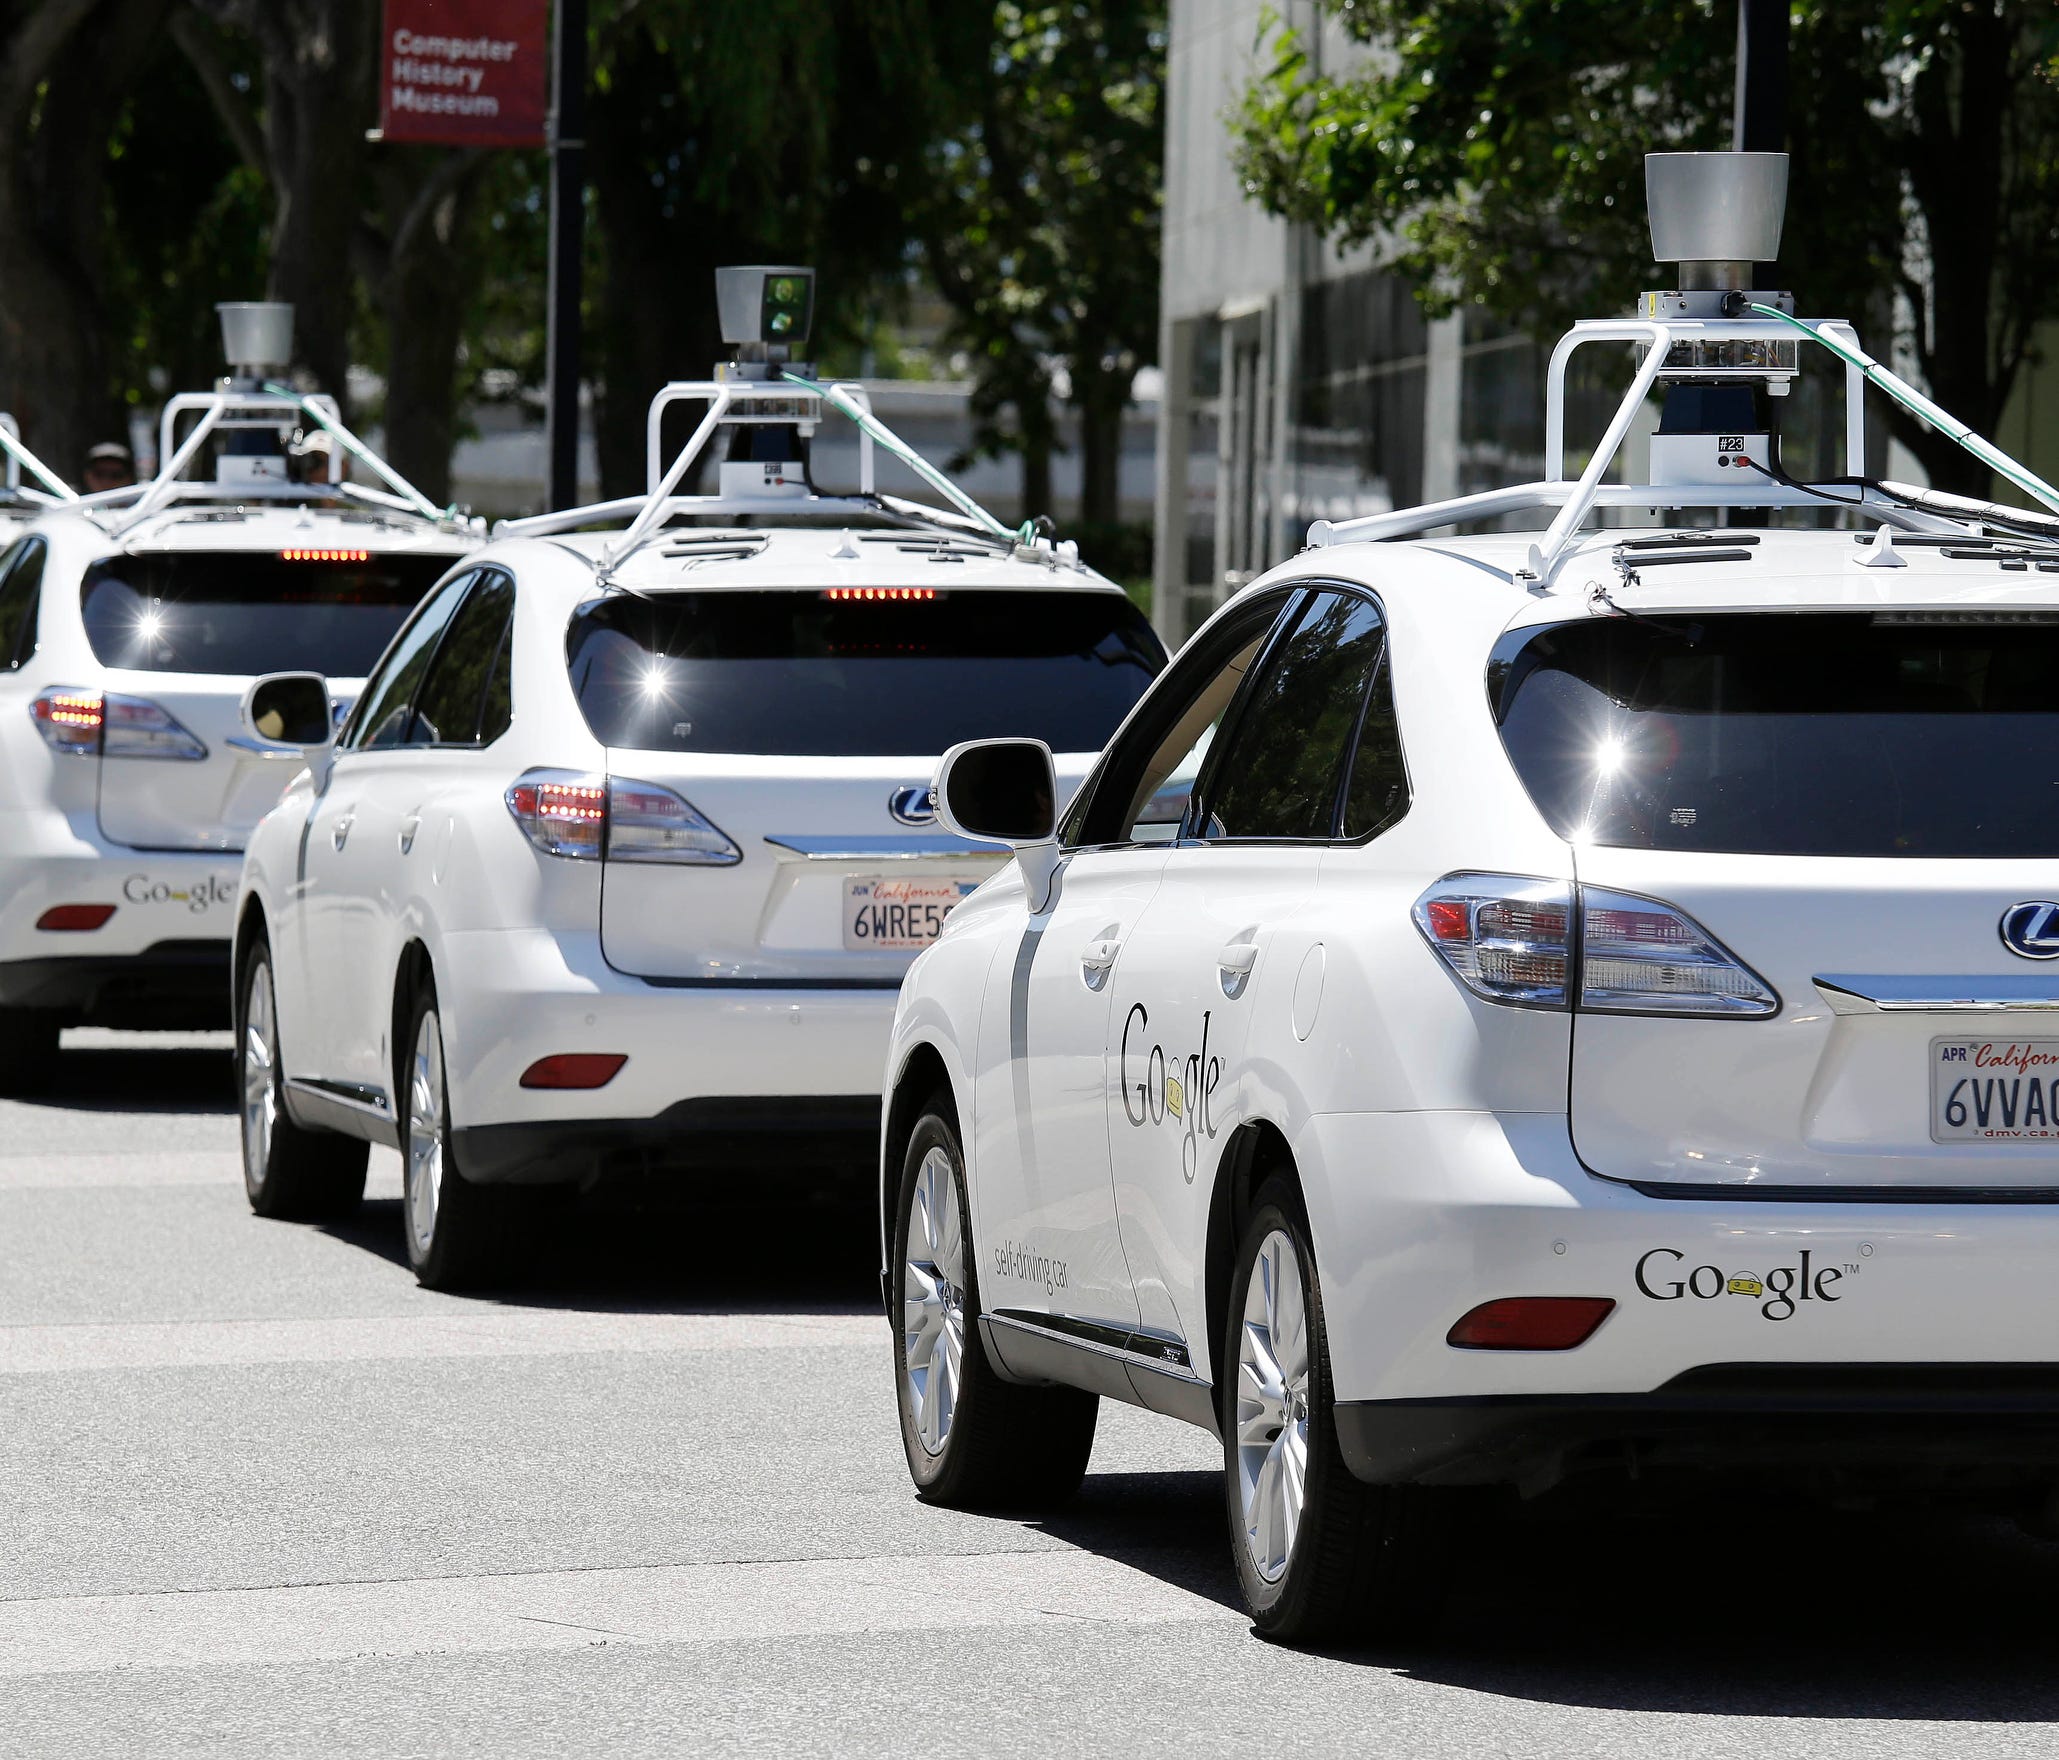 A row of Google self-driving cars outside the Computer History Museum in Mountain View, Calif.